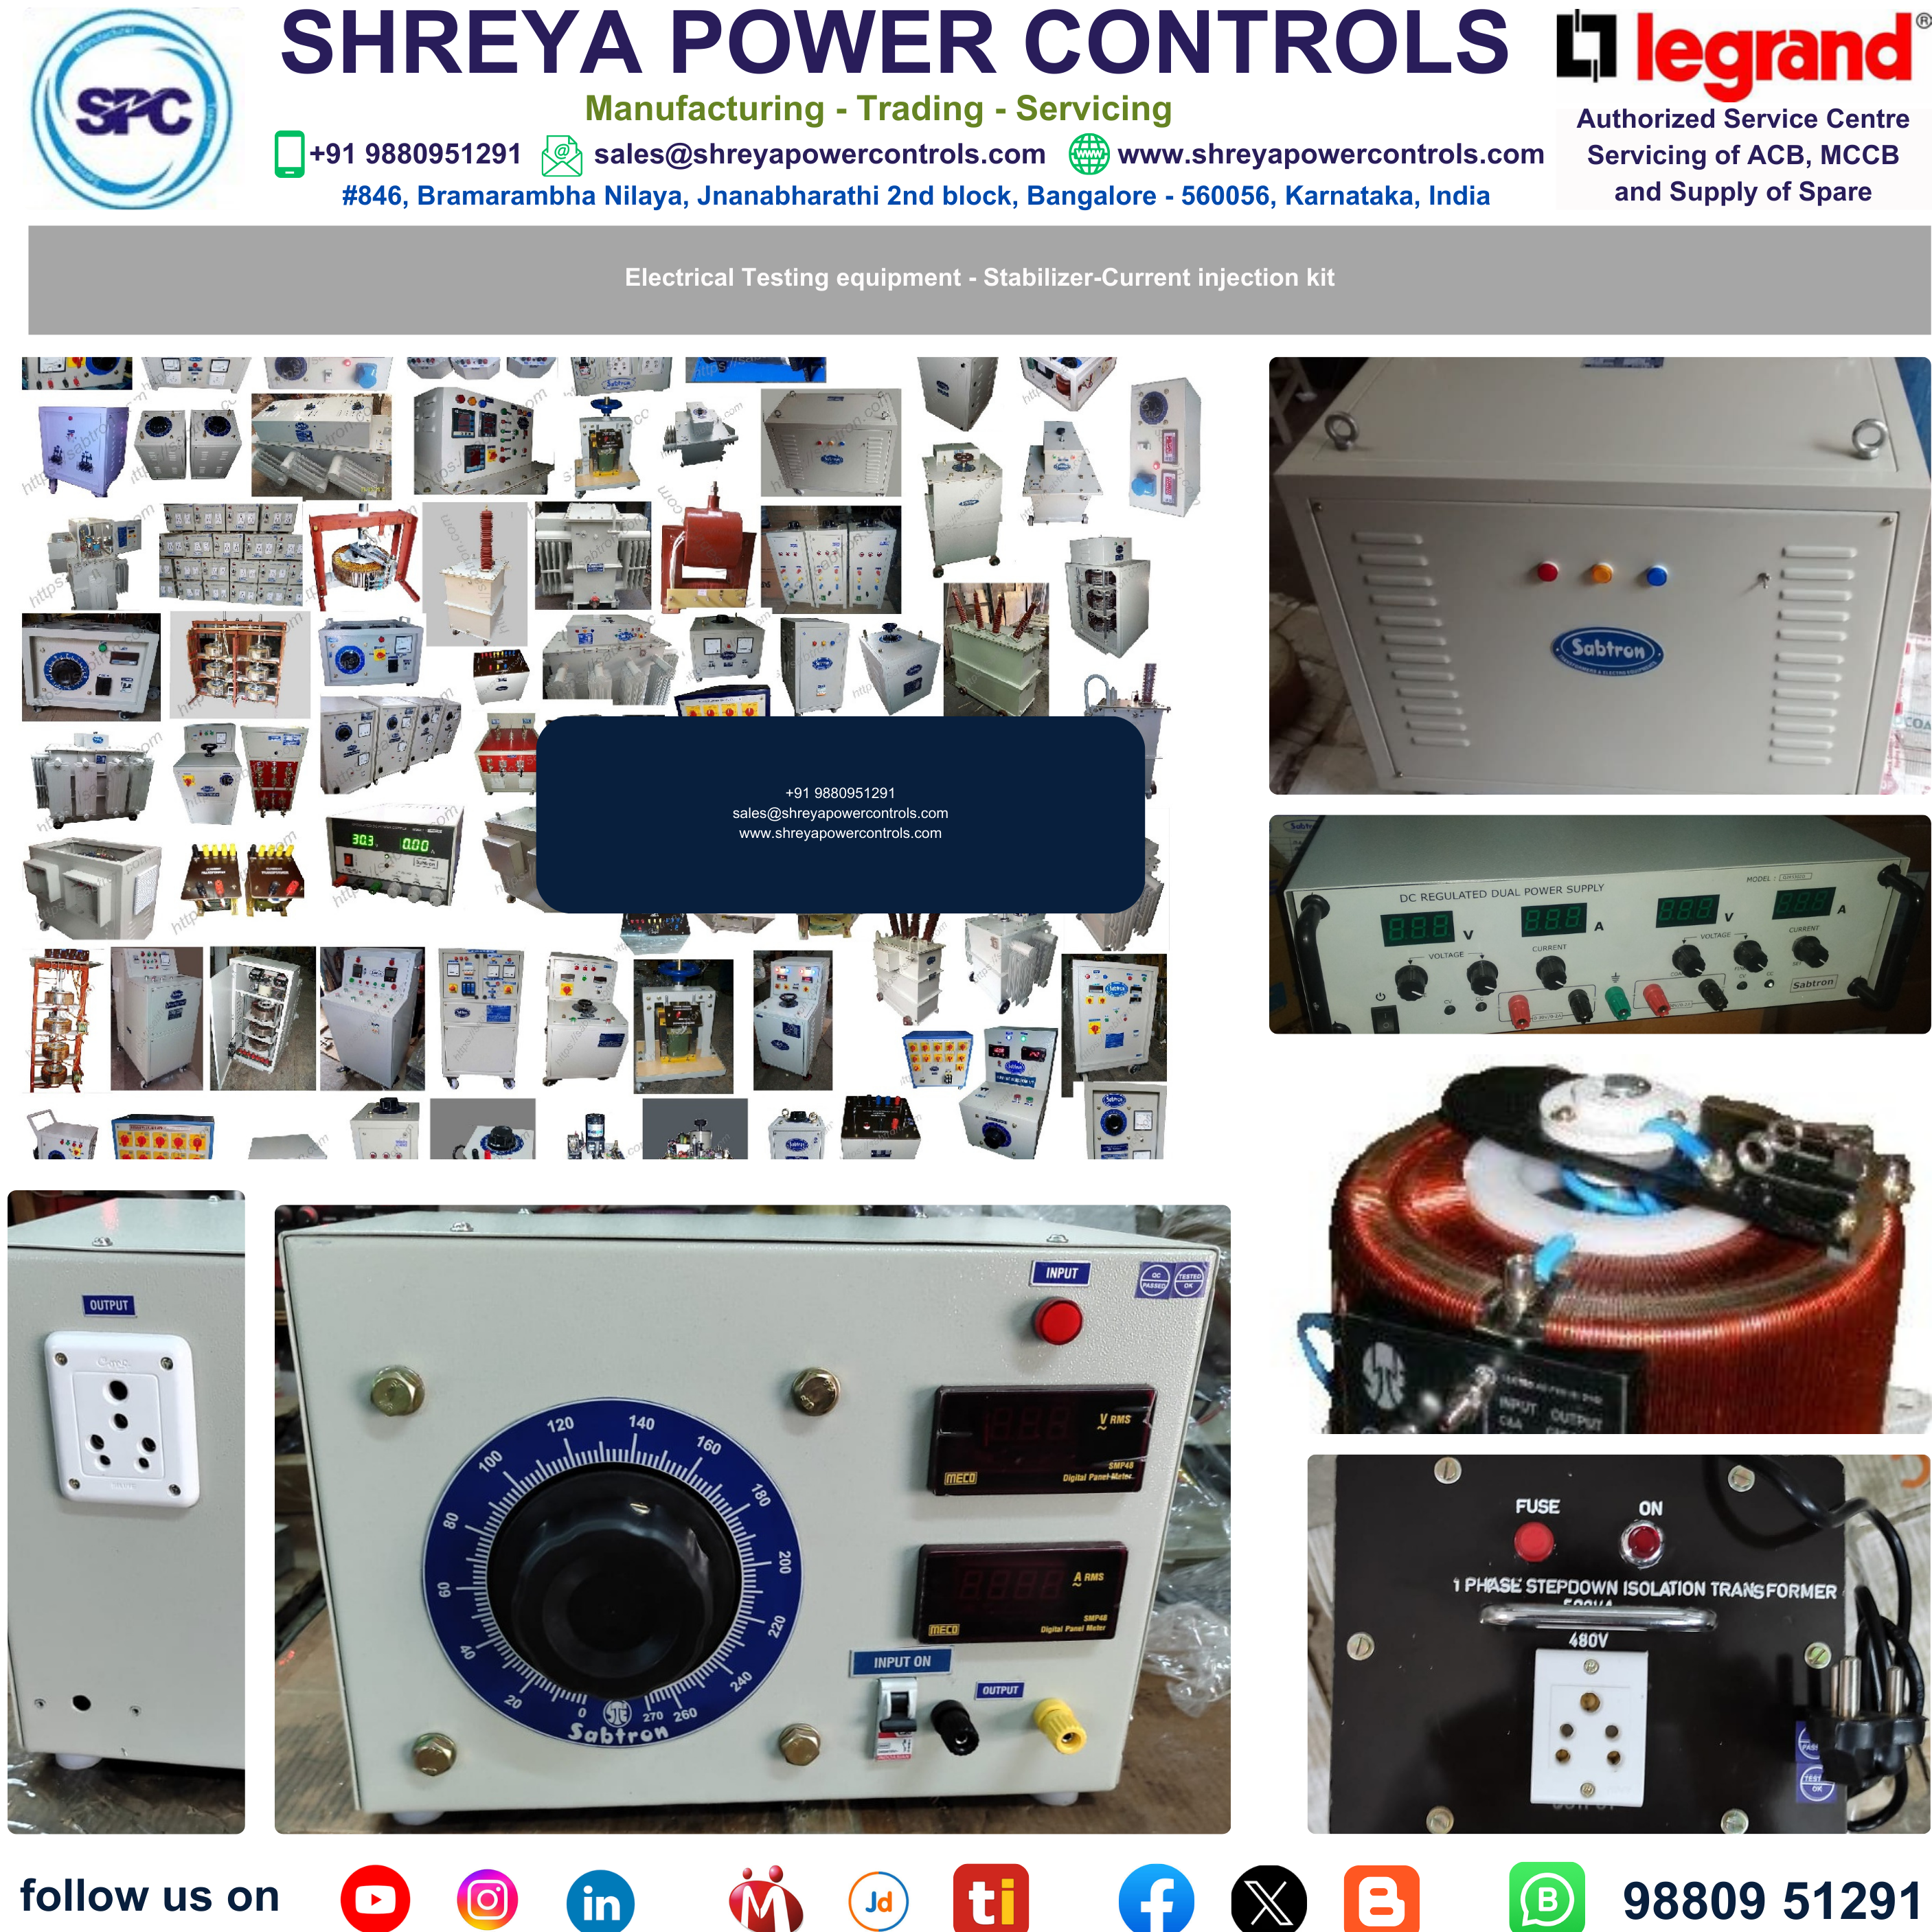 Electrical Testing equipment - Stabilizer